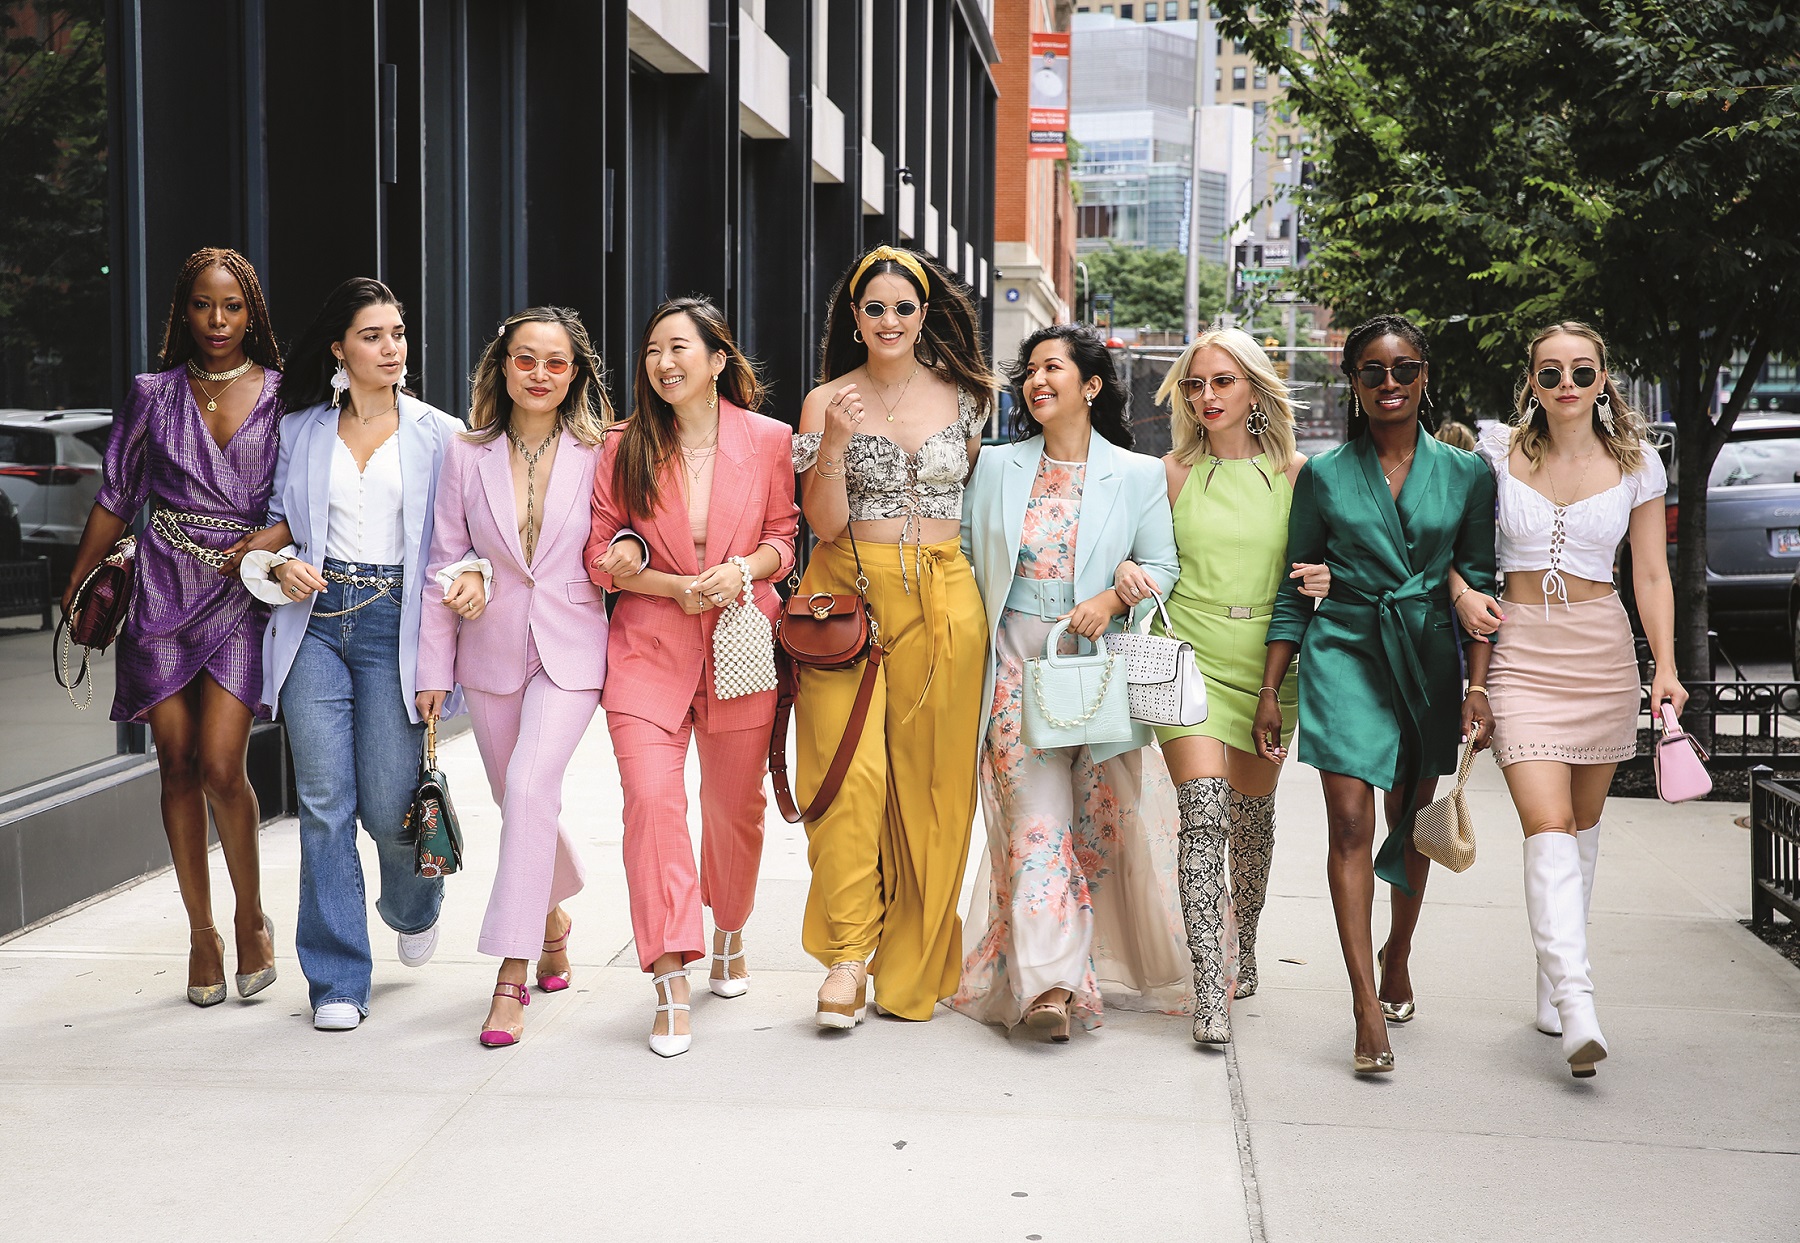 NEW YORK, NEW YORK - SEPTEMBER 07: Guests wearing vibrant outfits walk together during New York Fashion Week at Spring Studios on September 07, 2019 in New York City. (Photo by Donell Woodson/Getty Images)